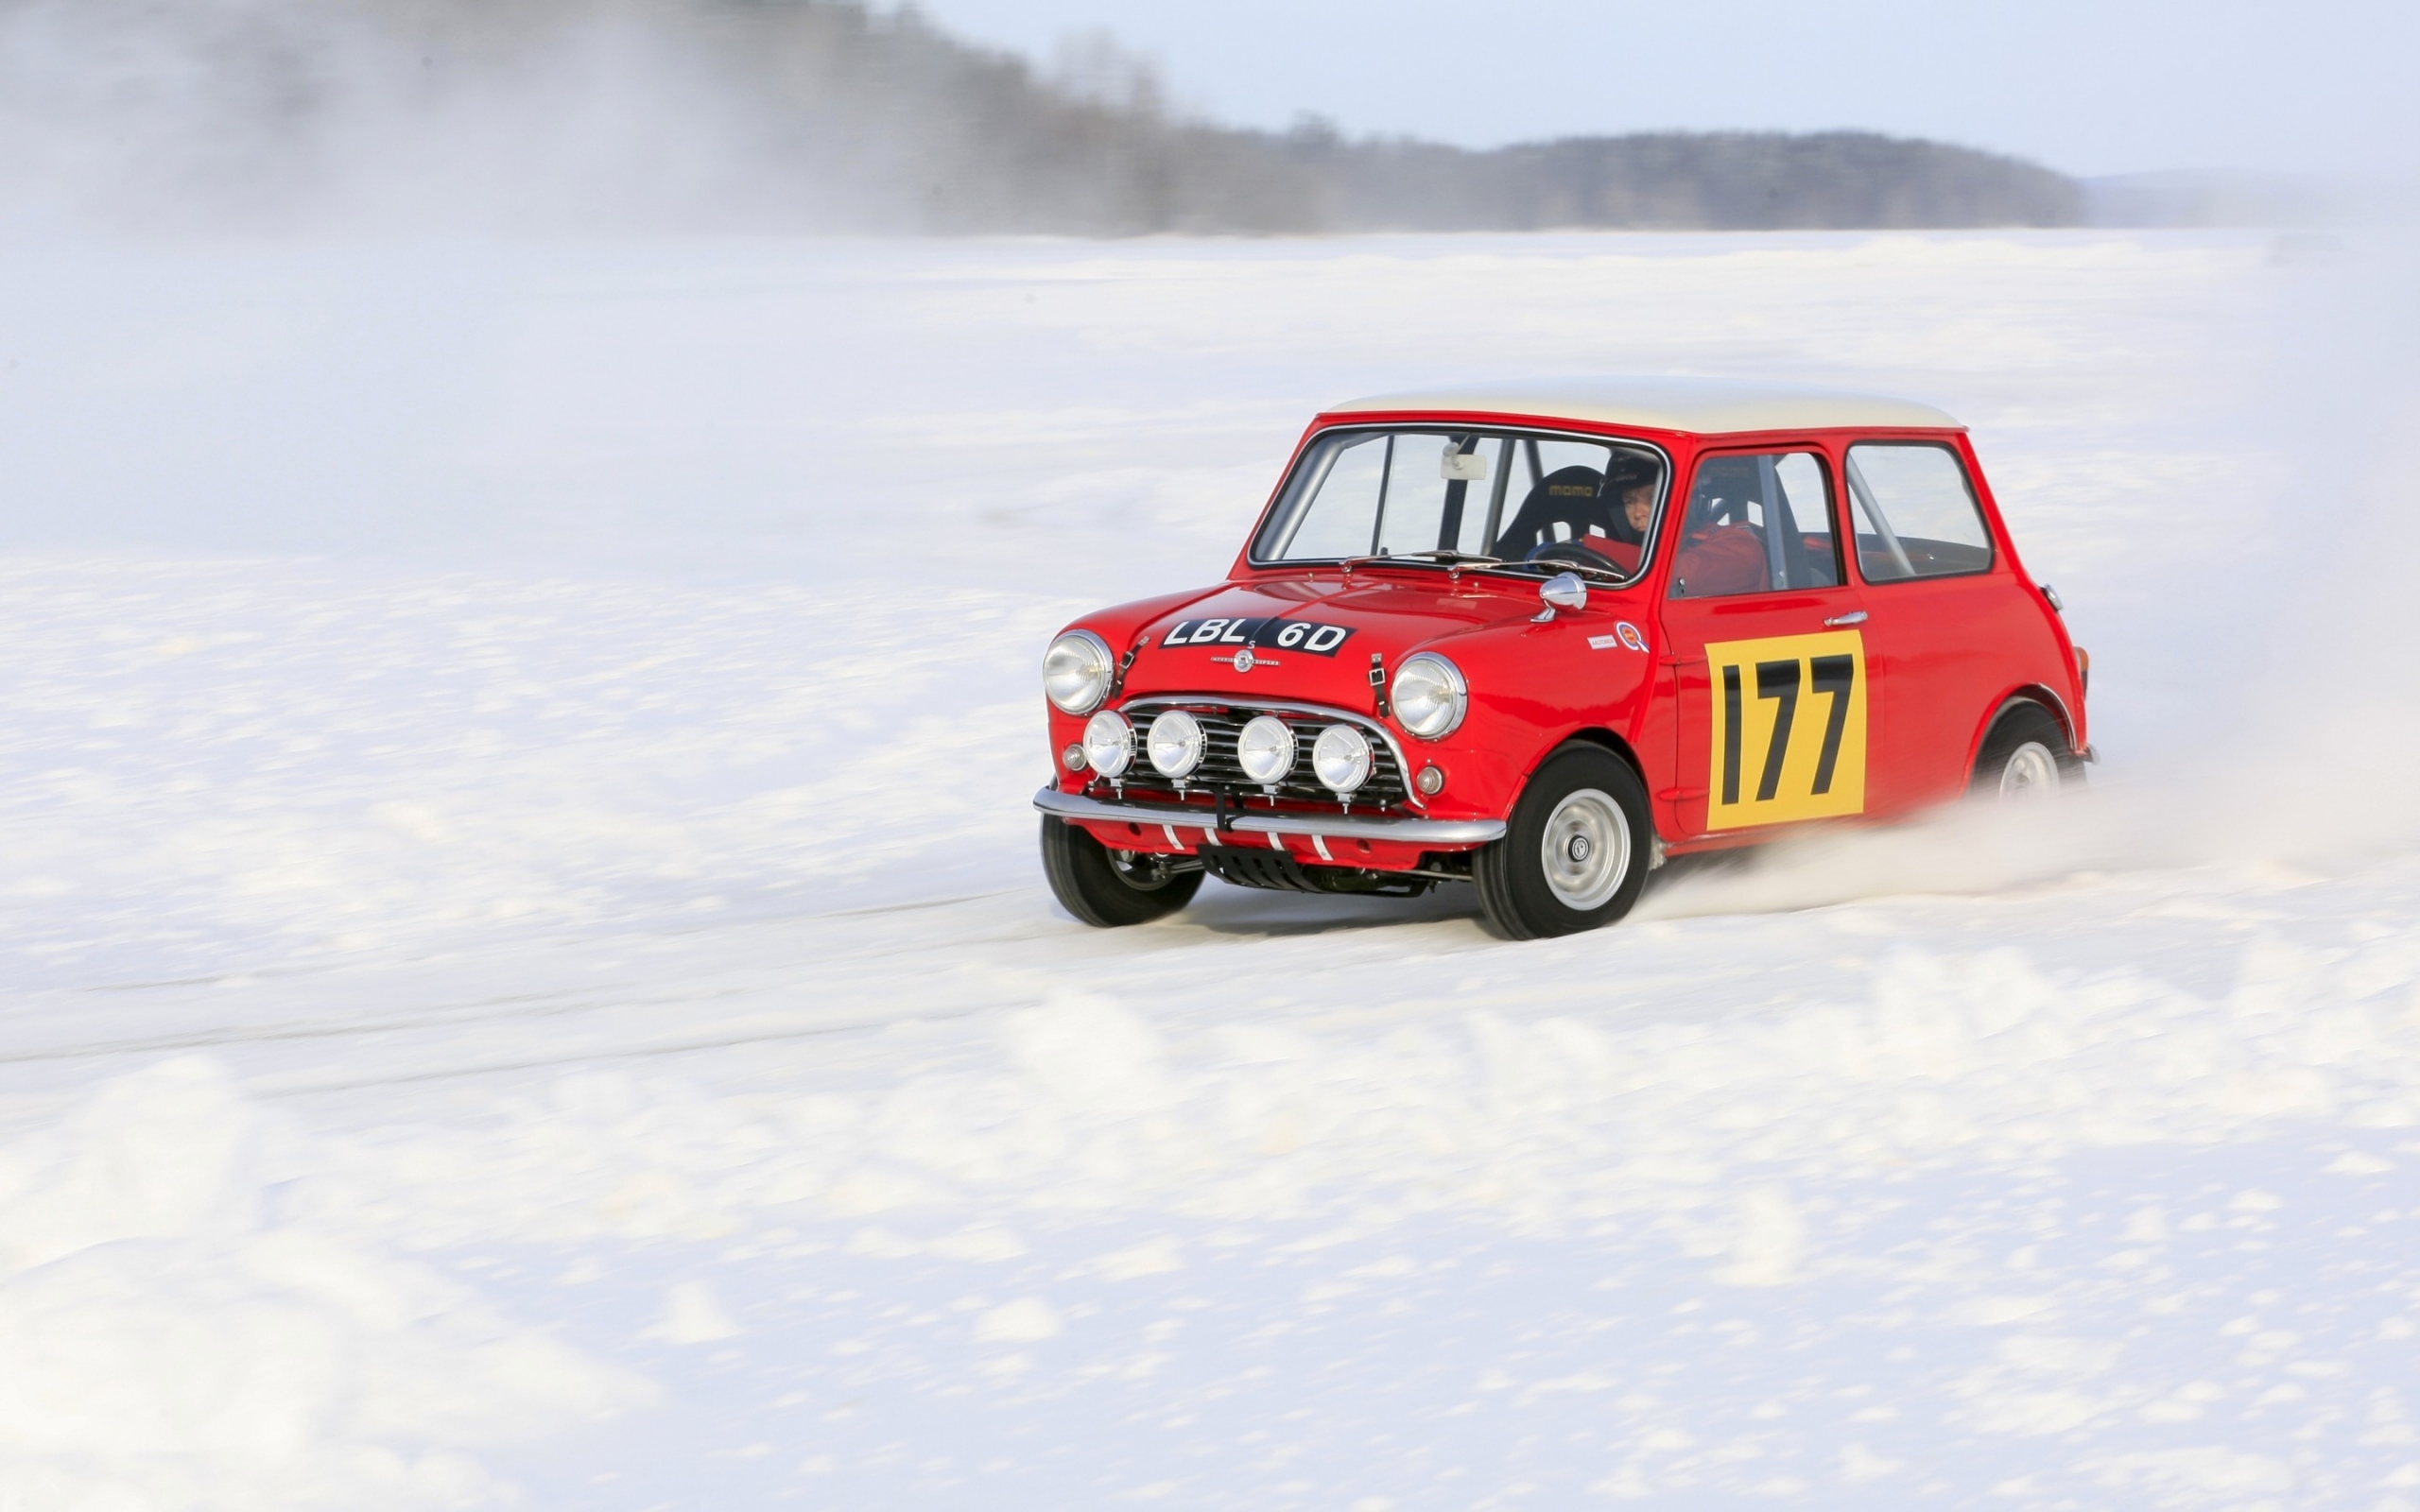 Mini Snow Race for 2560 x 1600 widescreen resolution